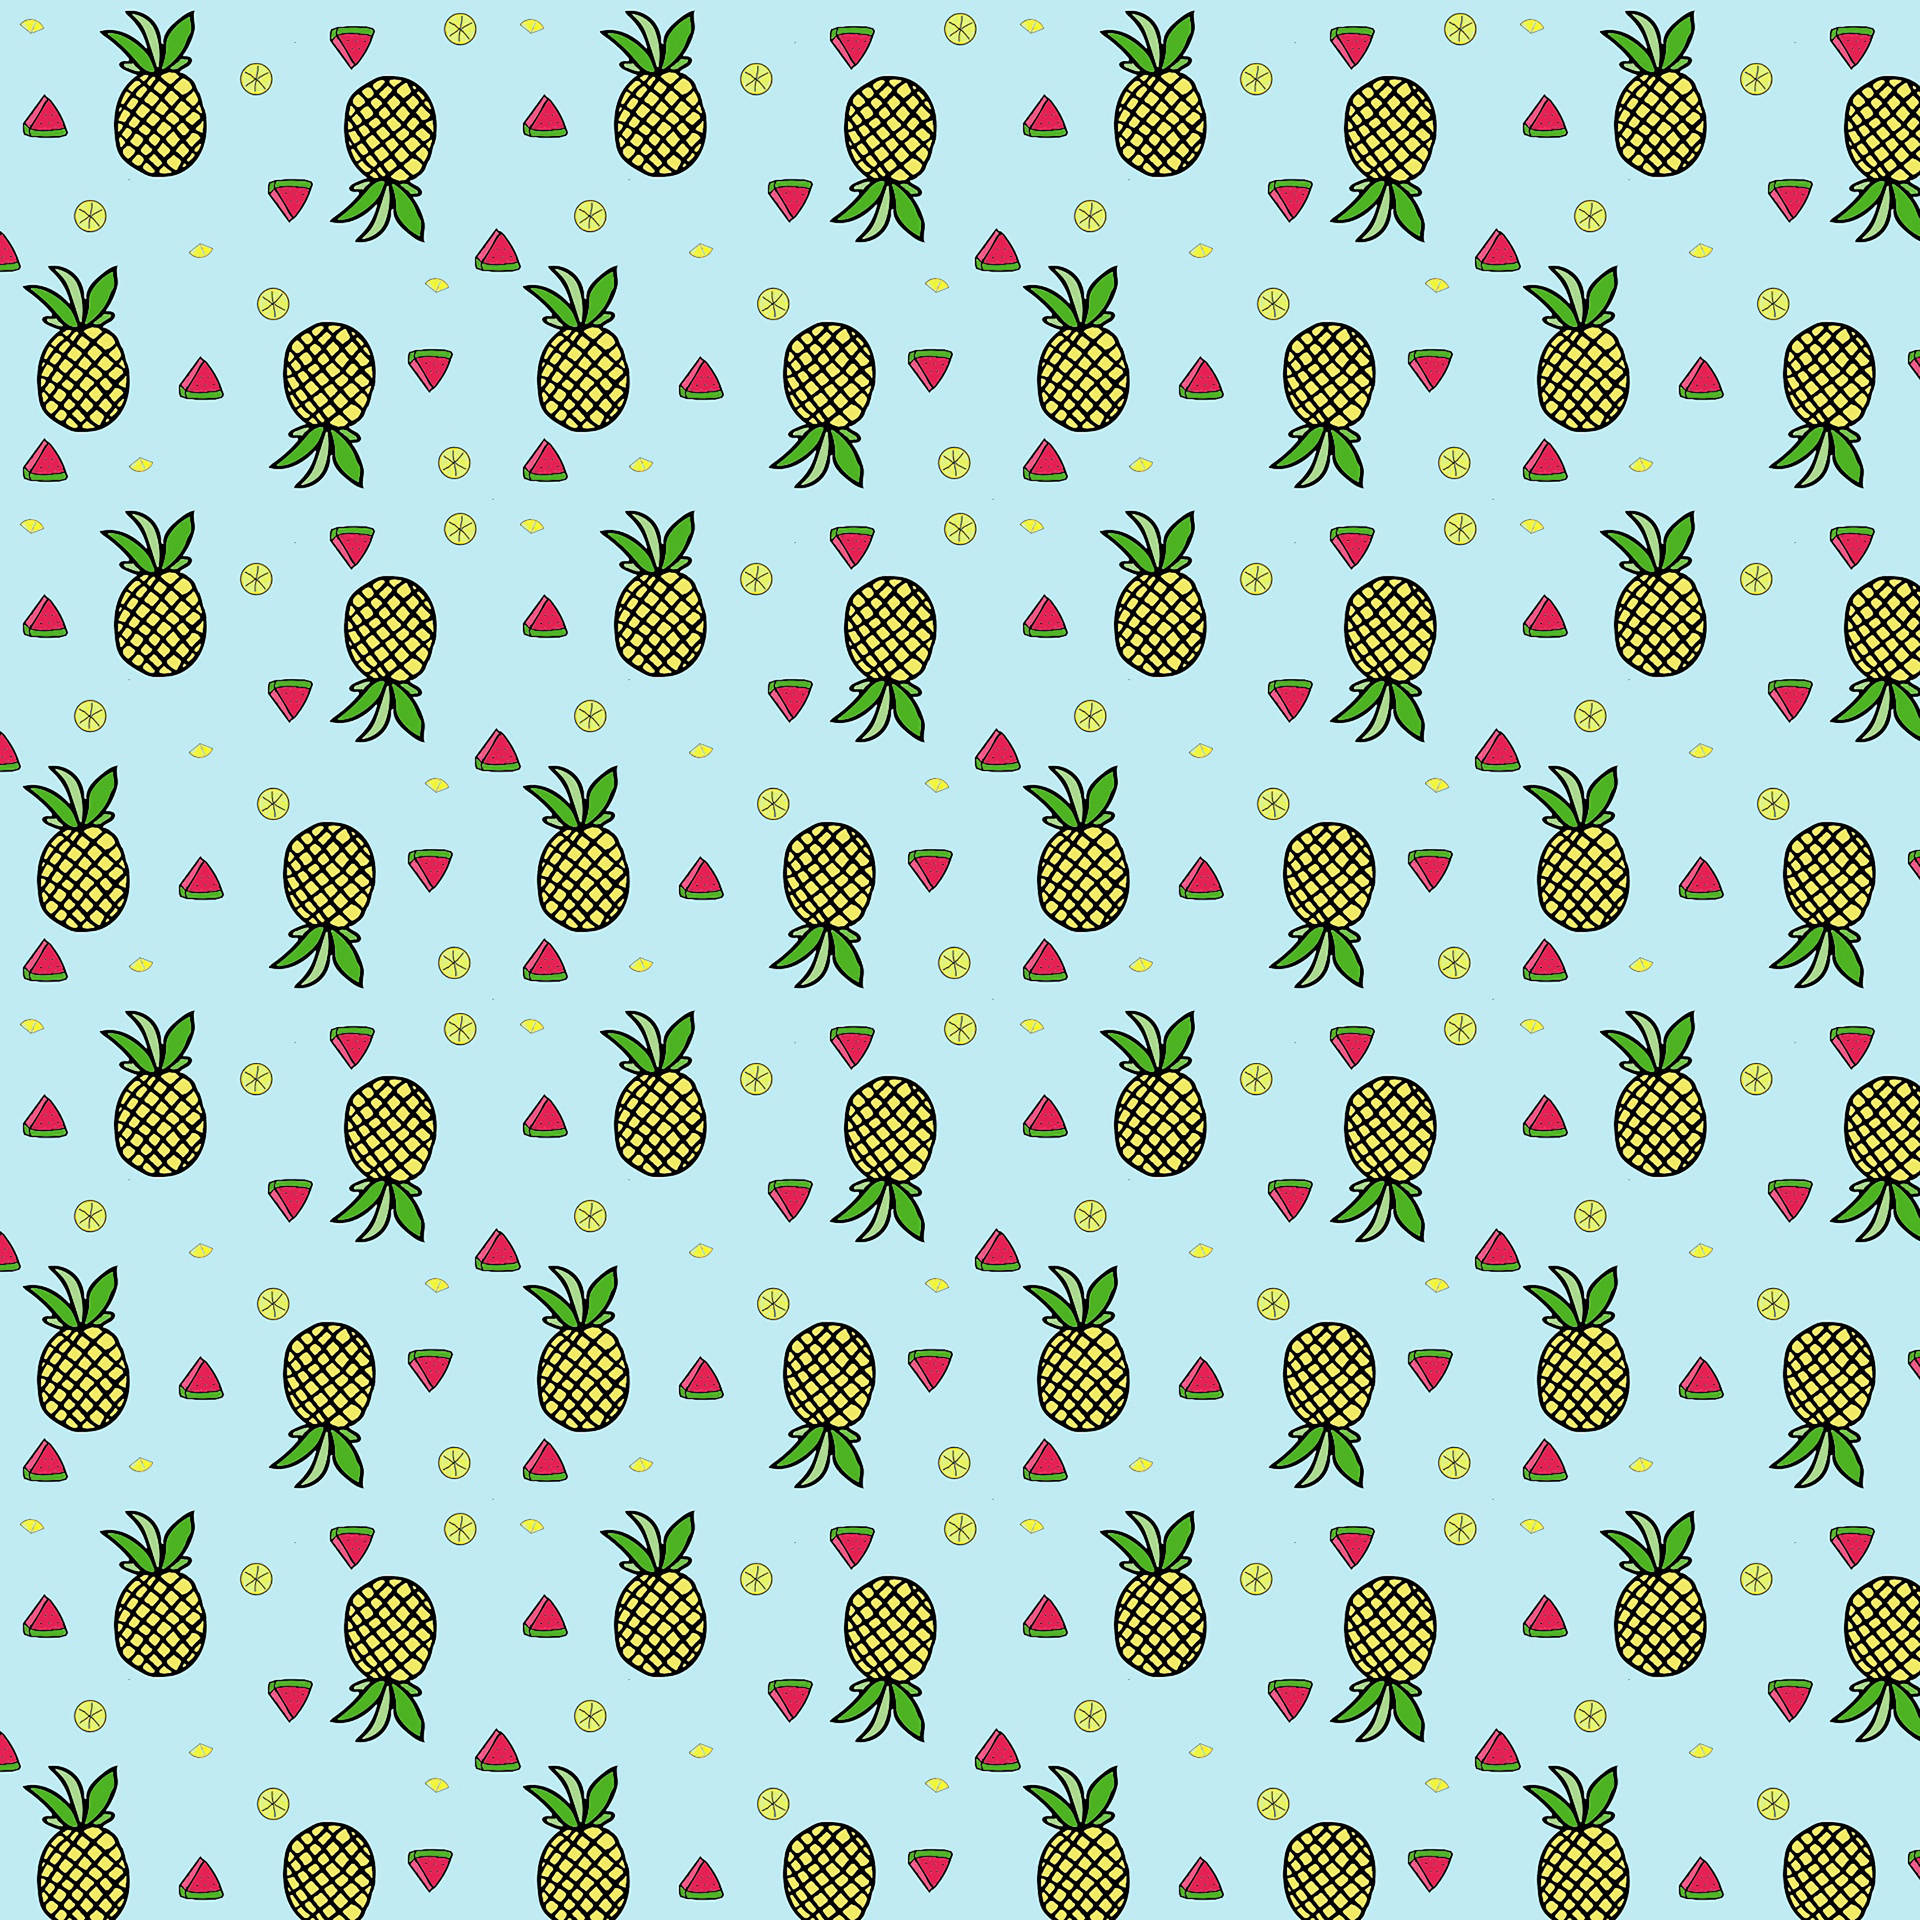 3000X3000 Pineapple Wallpaper and Background